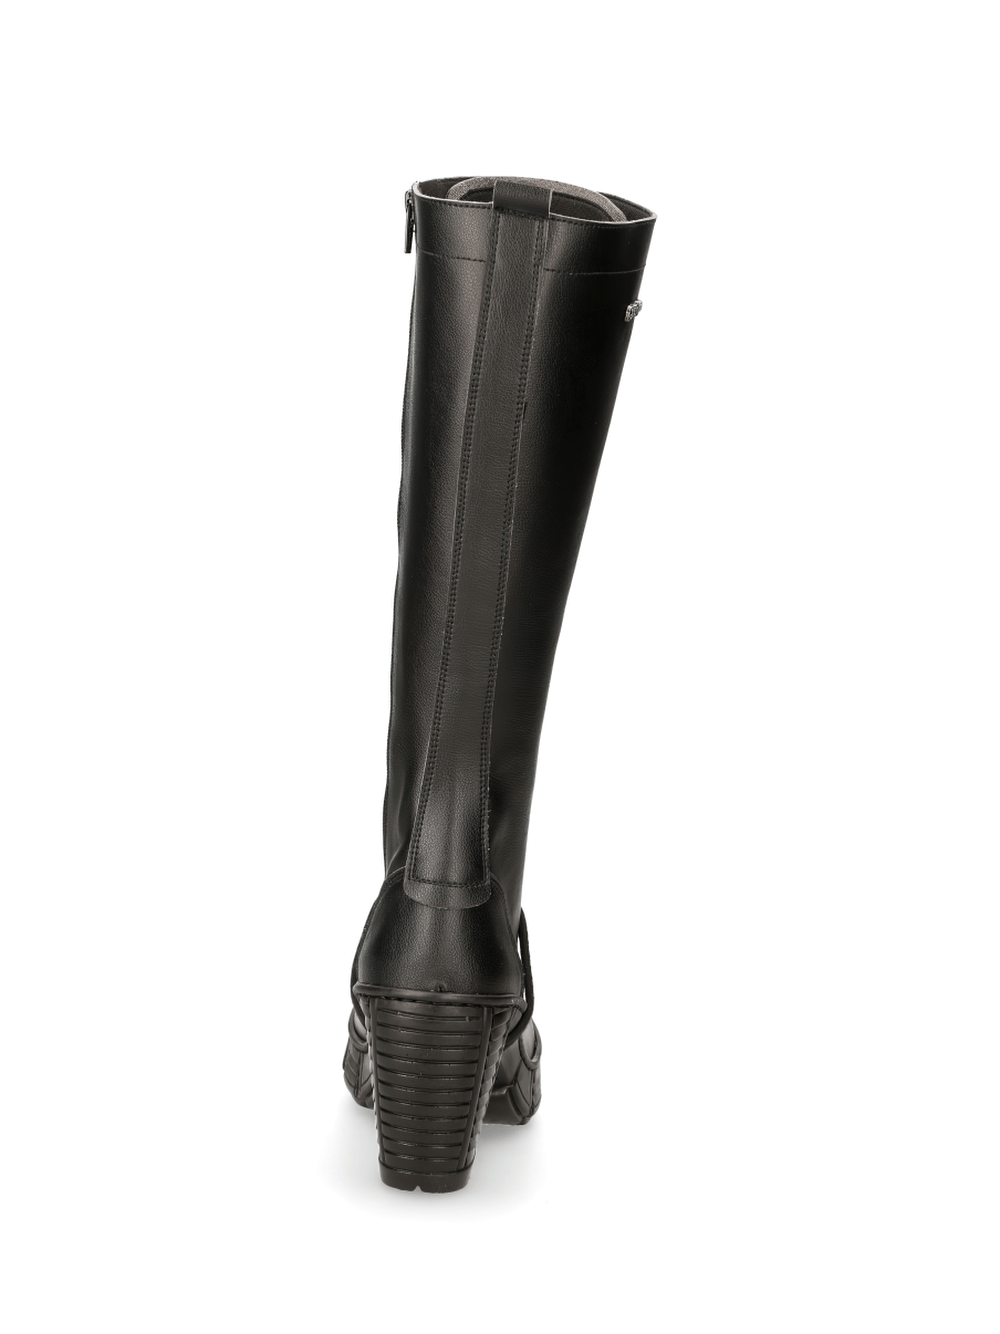 NEW ROCK Black Lace-Up Gothic Knee High Boots